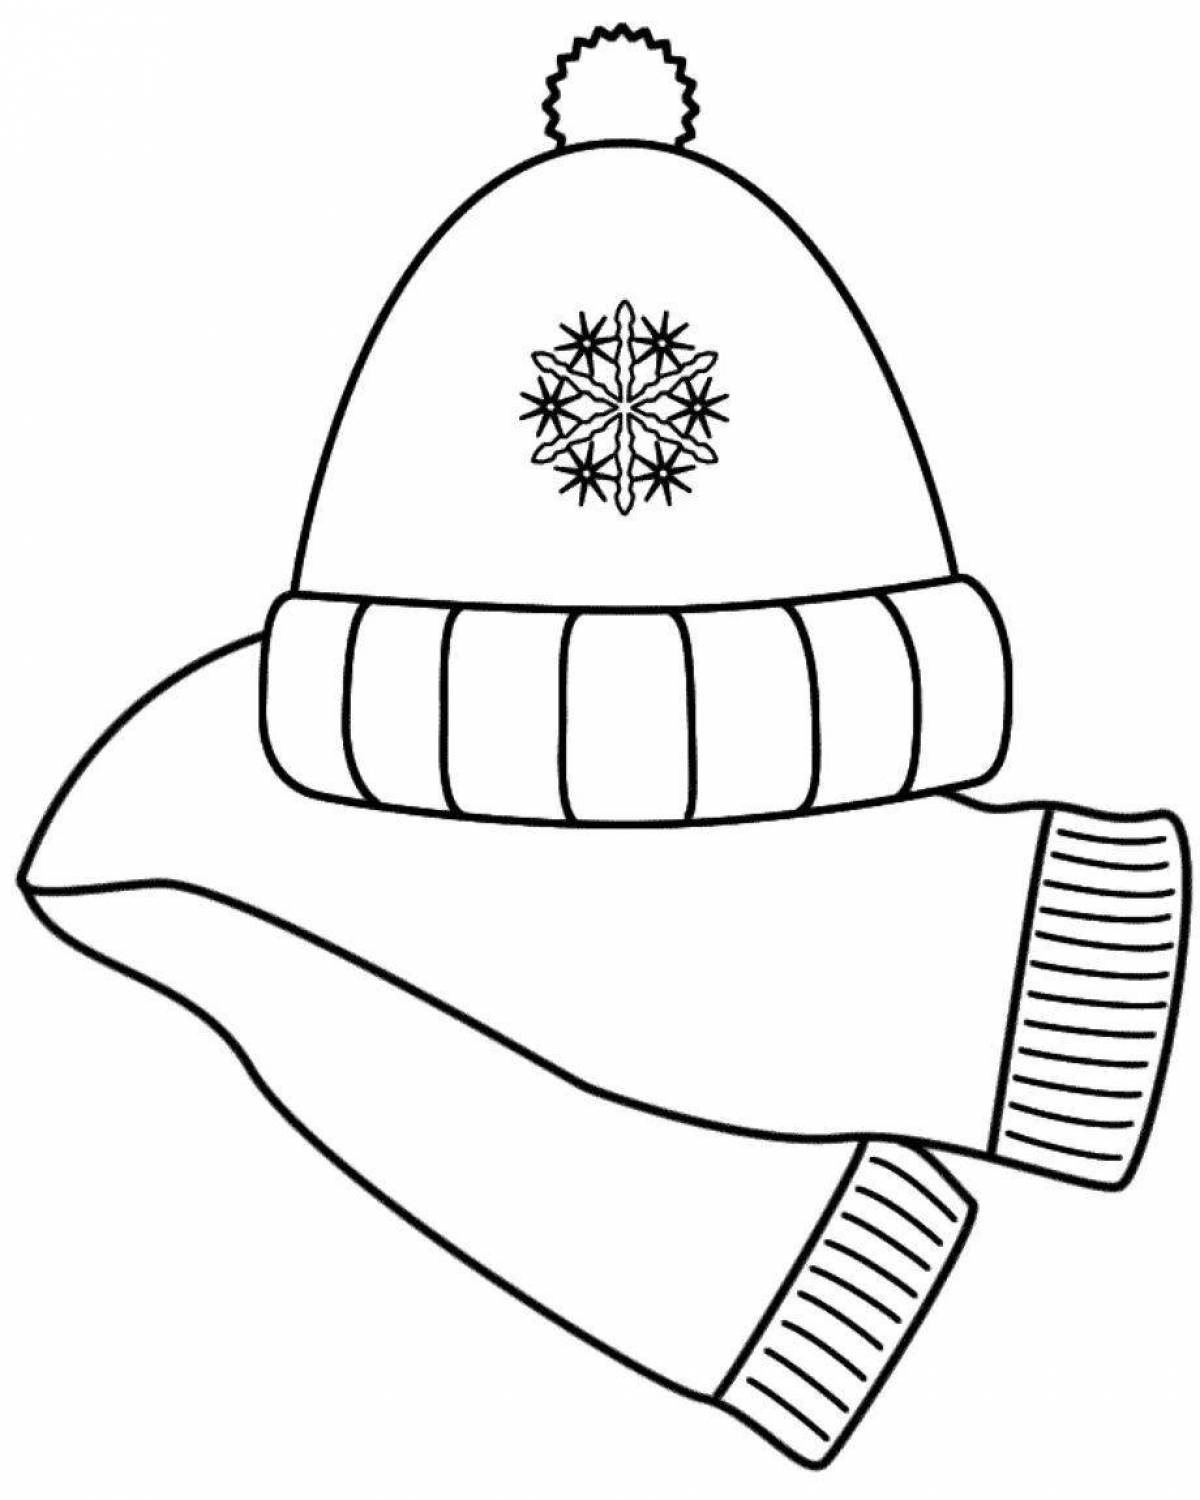 Humorous scarf and hat coloring book